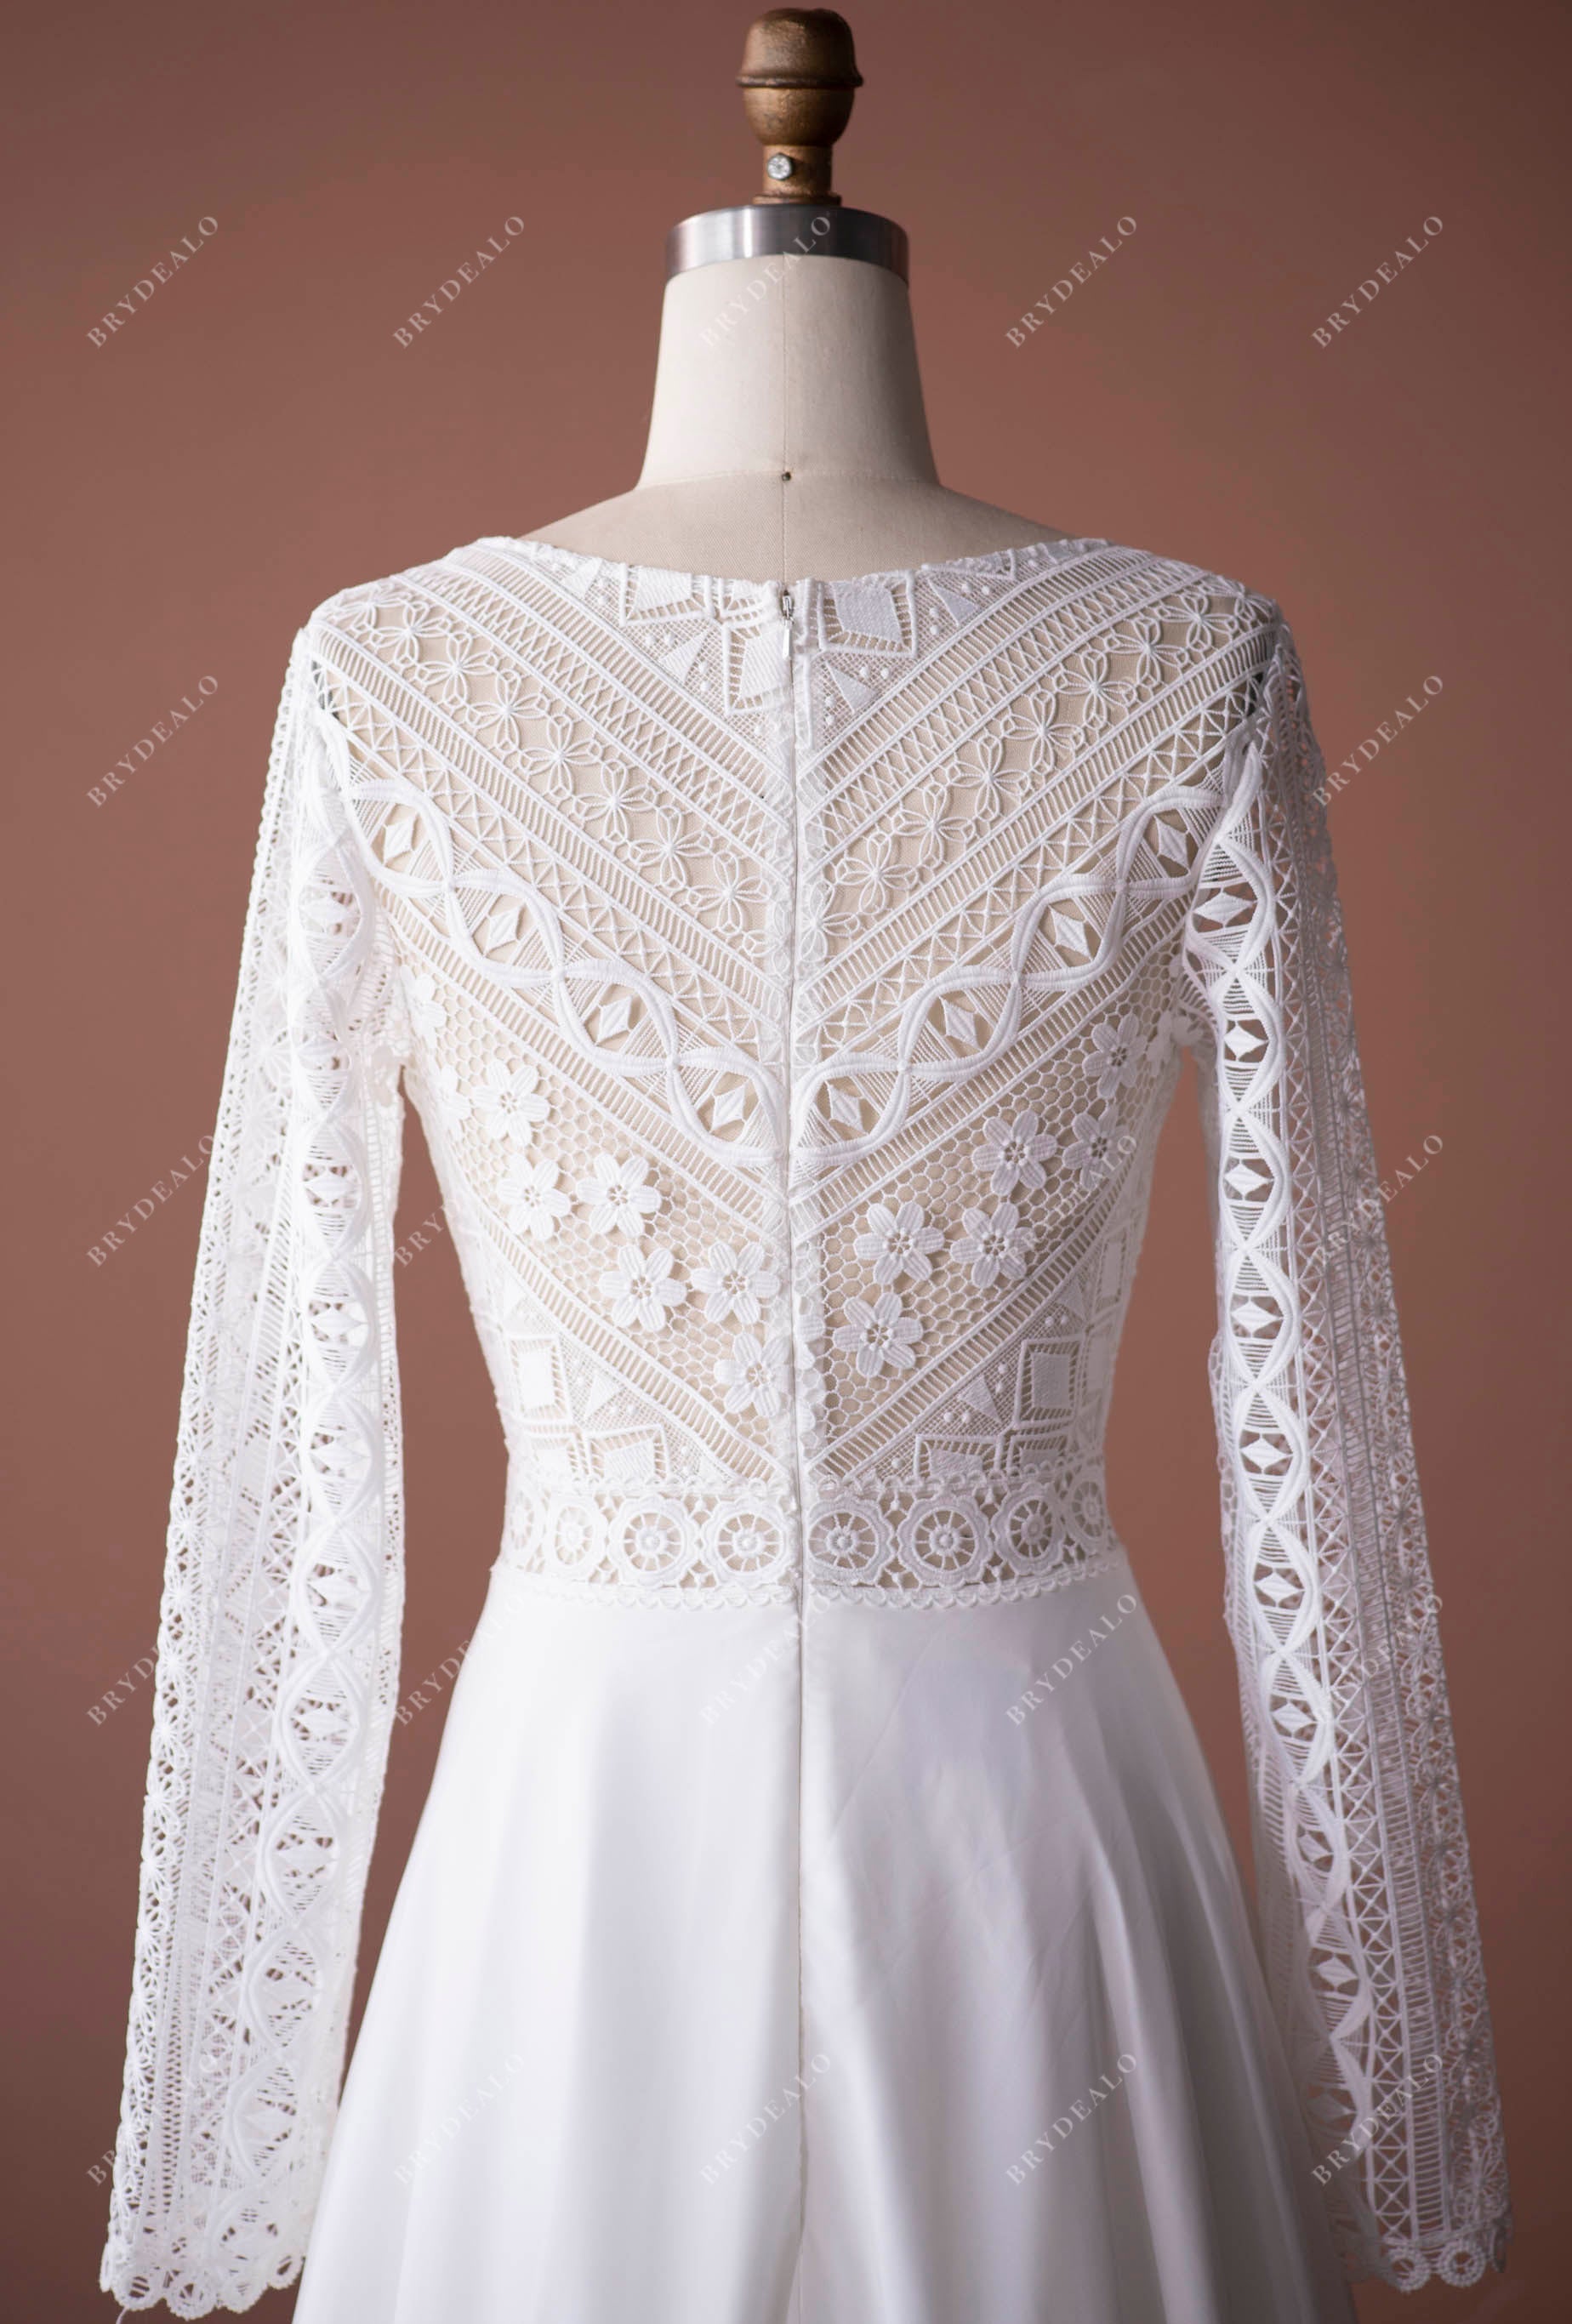 sheer long sleeves lace wedding gown